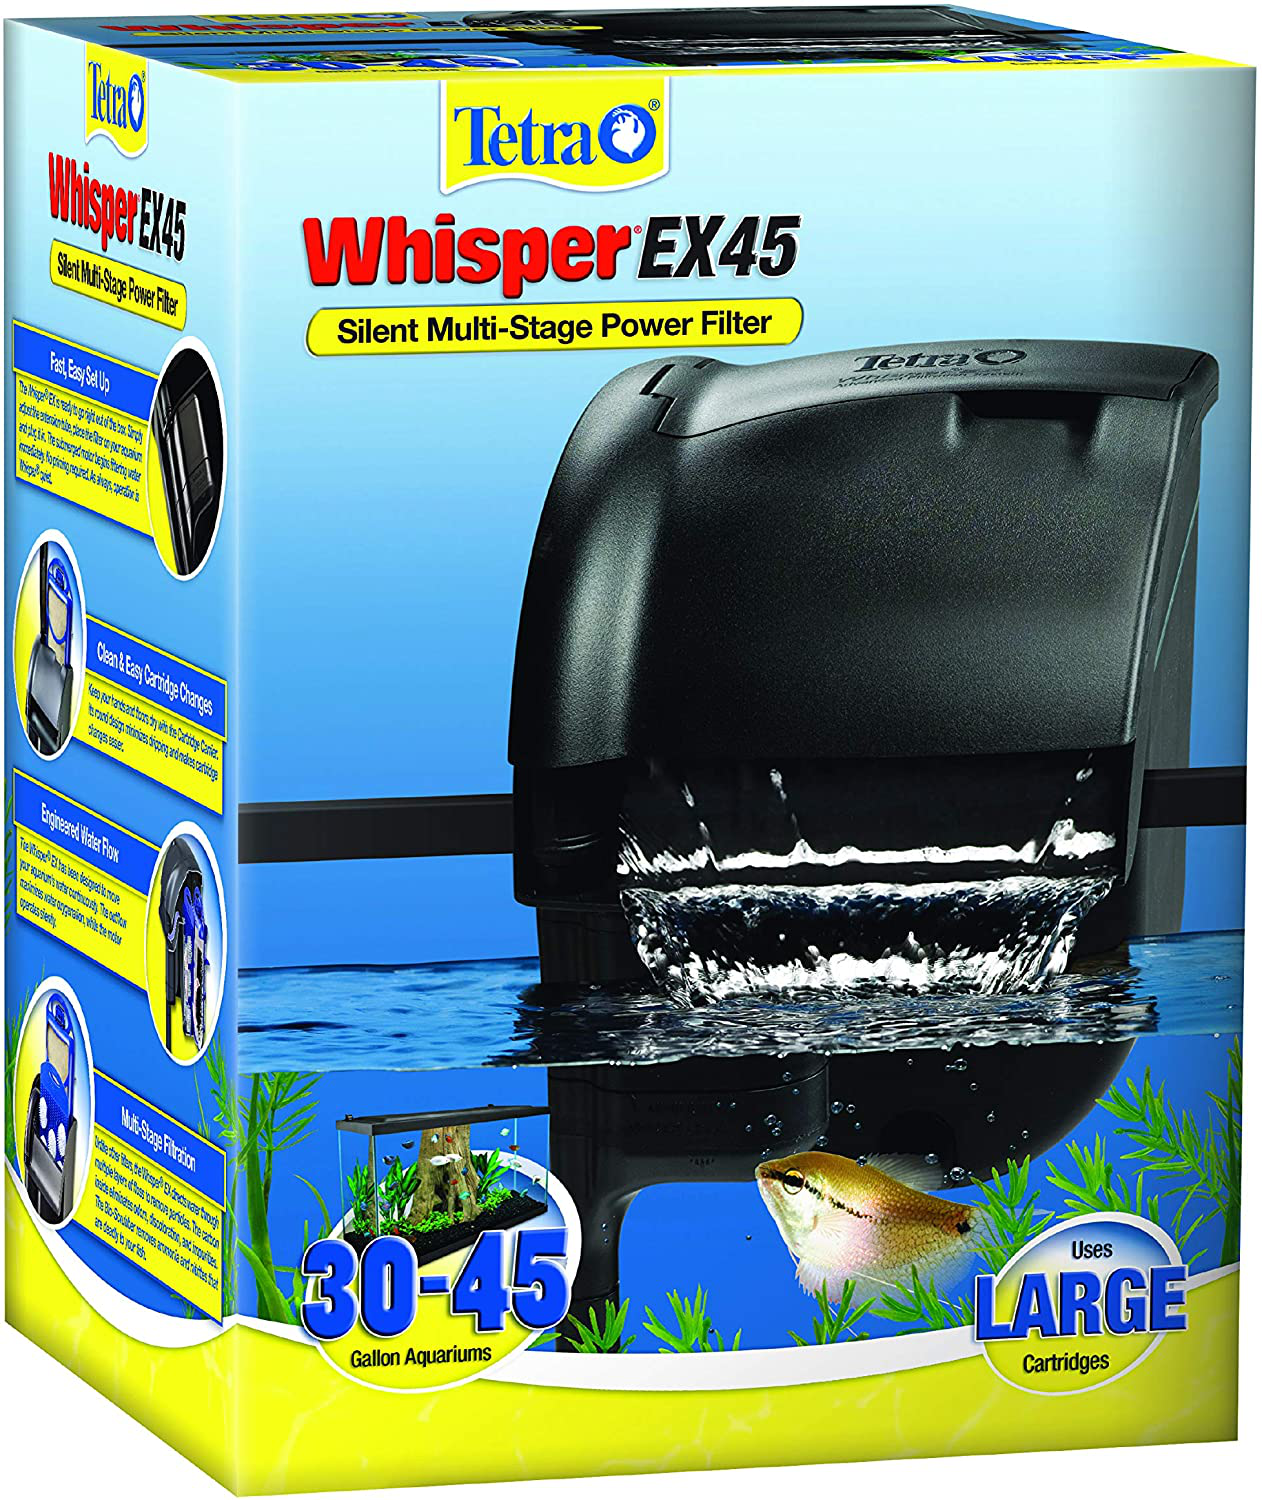 Tetra Whisper EX Silent Multi-Stage Power Filter for Aquariums